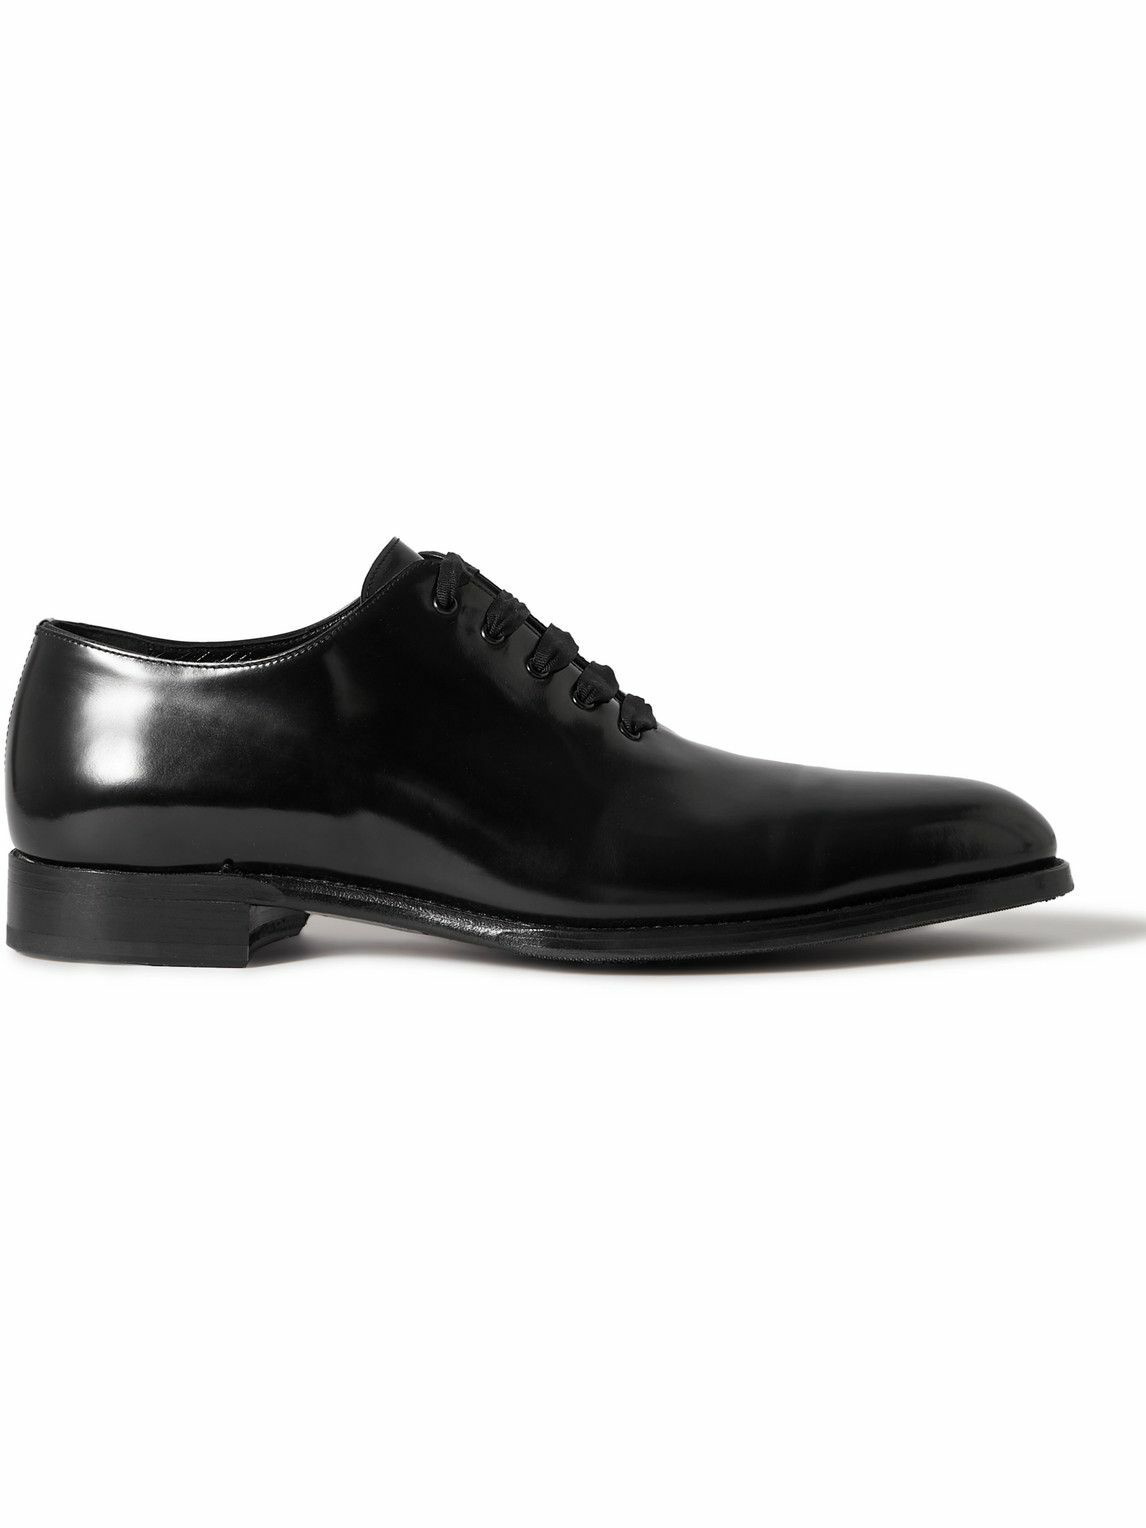 Dunhill - Glossed-Leather Oxford Shoes - Black Dunhill